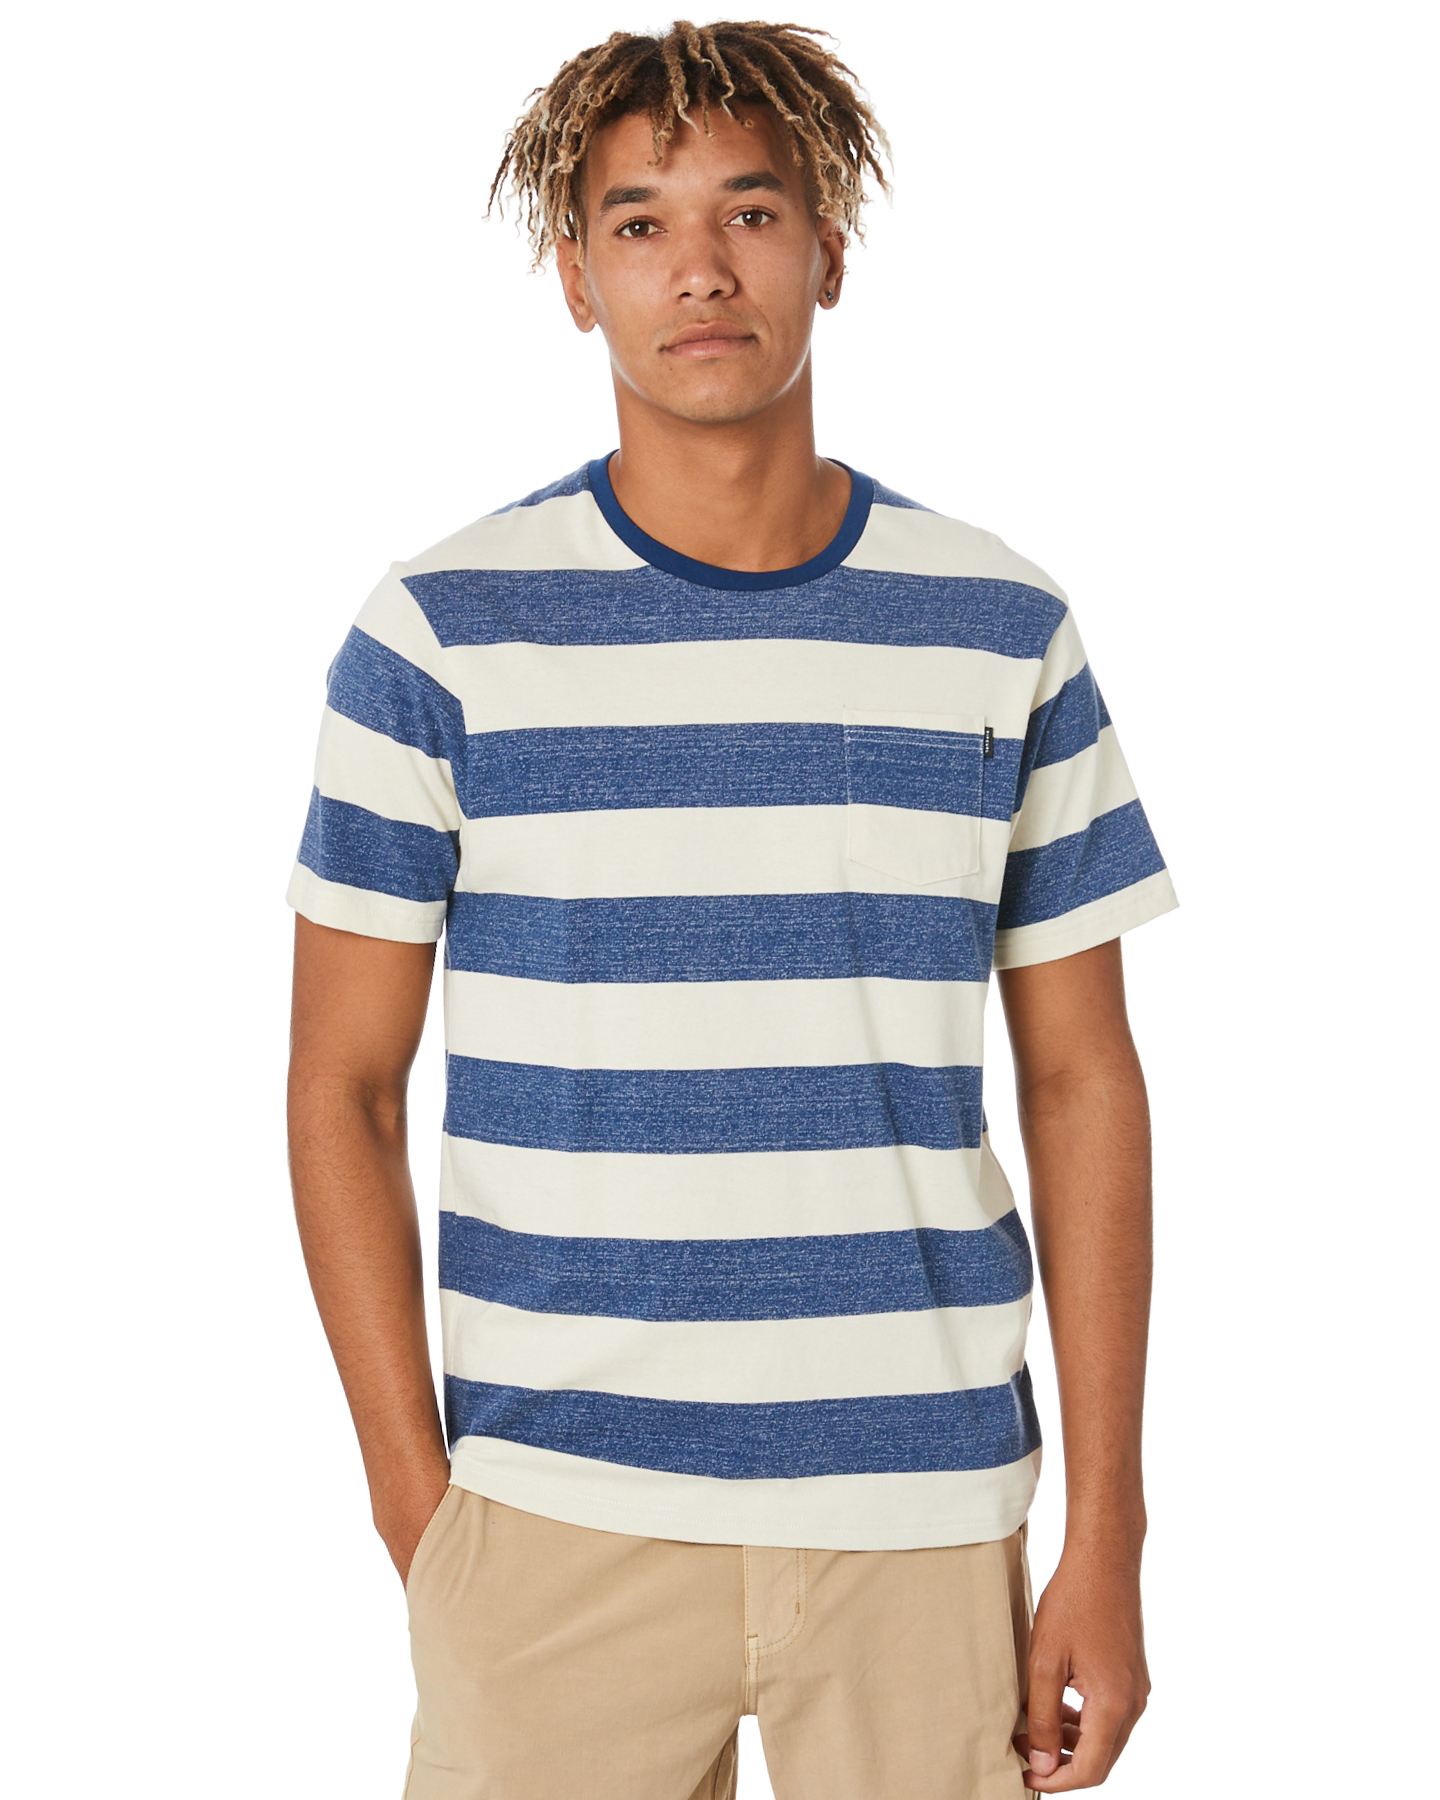 Rip Curl The Count Stripe Mens Tee - Royal Blue | SurfStitch